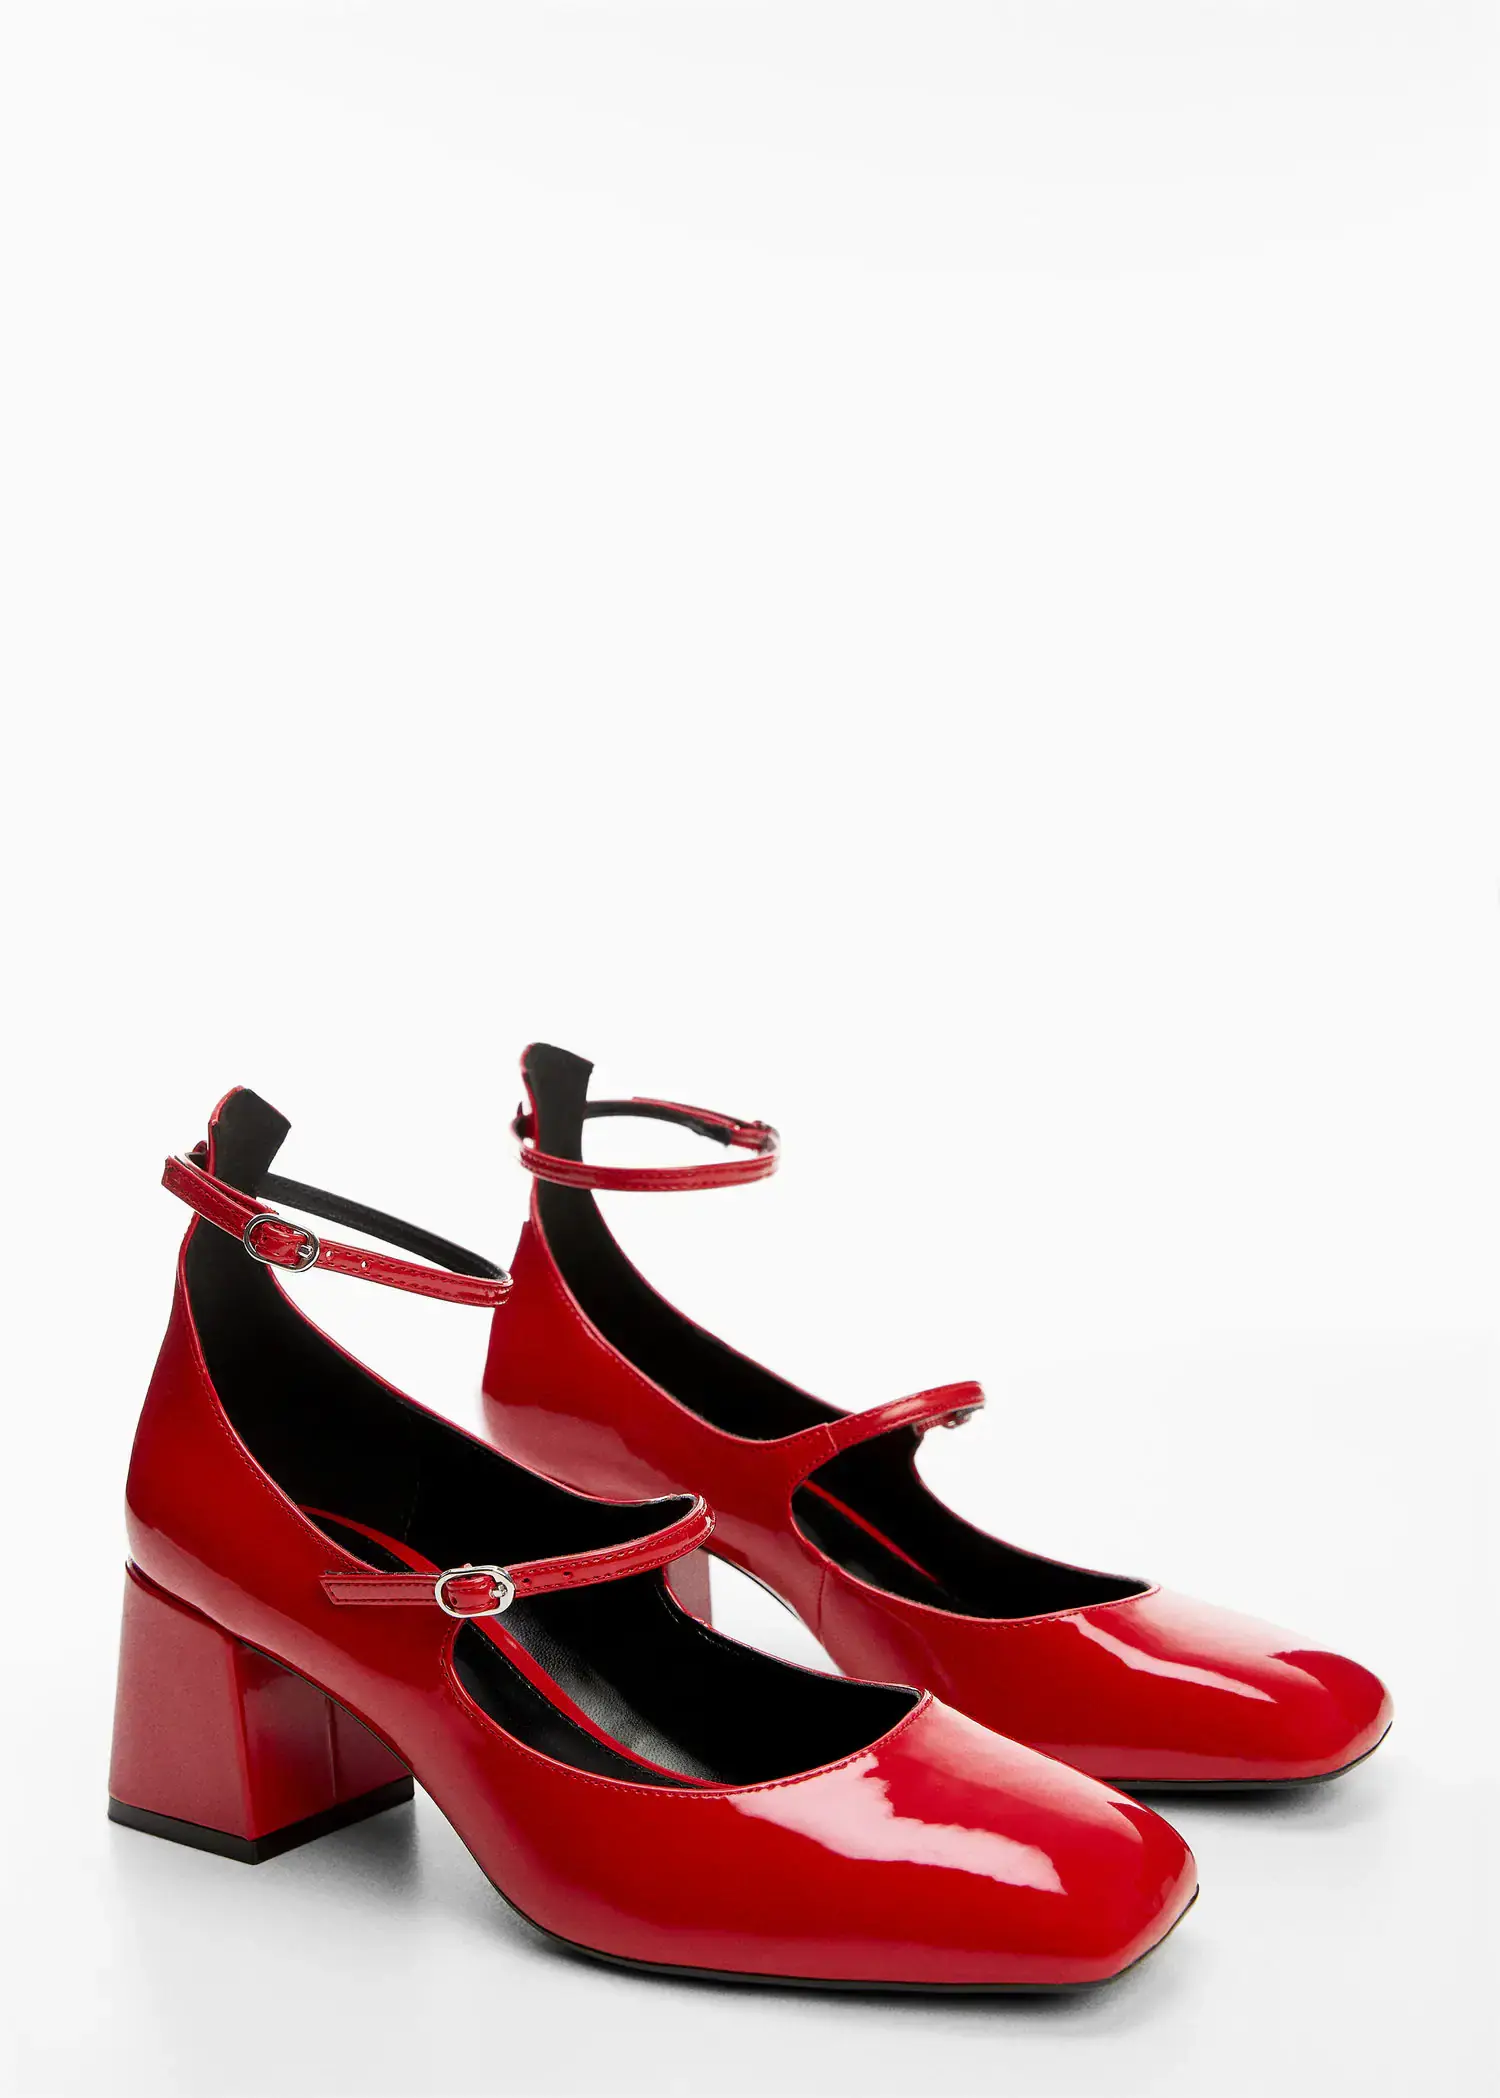 Mango Patent leather buckled shoes. 2